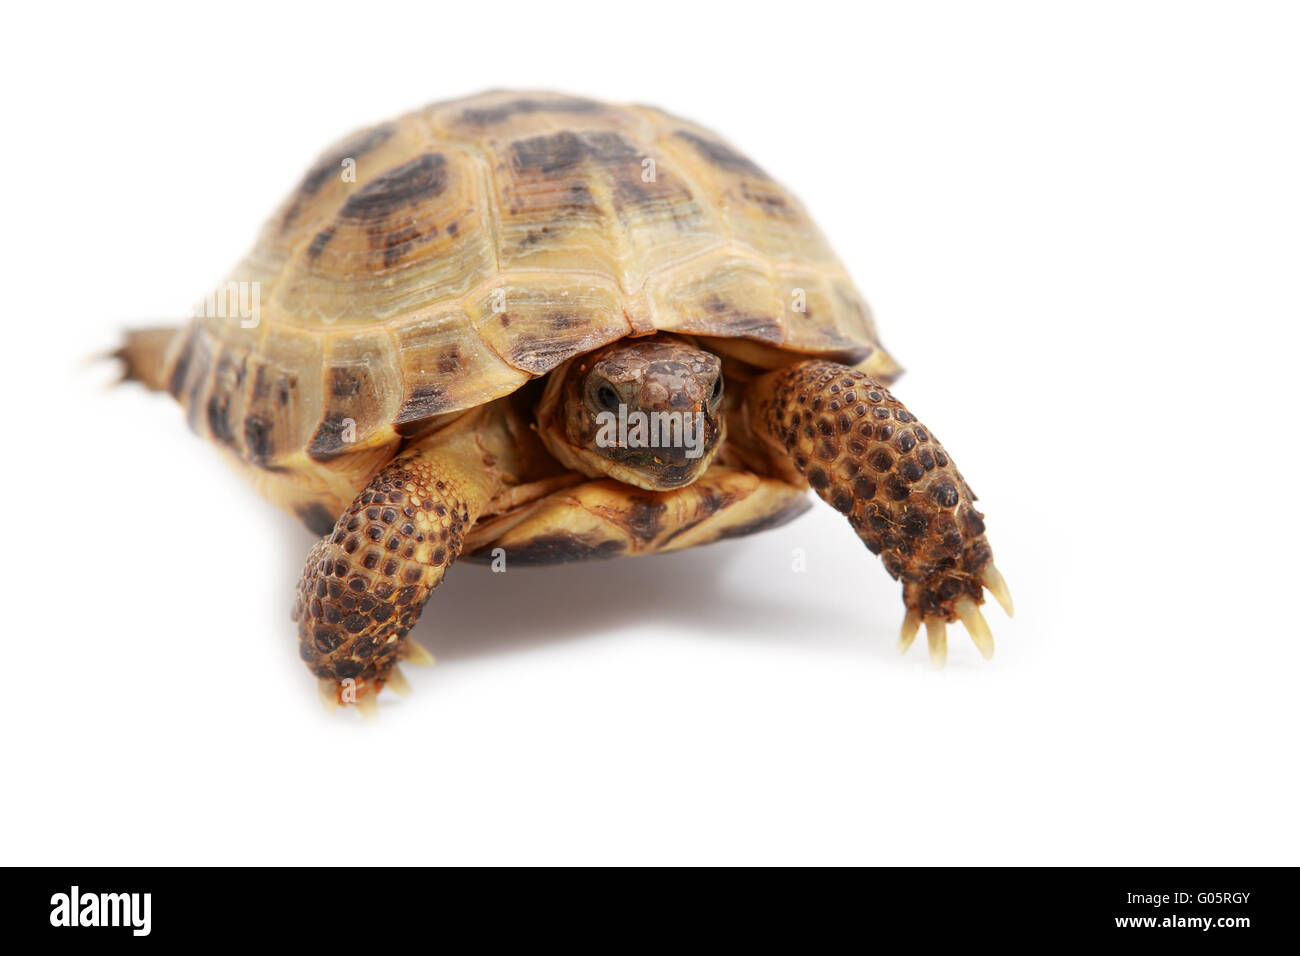 Russian tortoise, Horsfield's tortoise or Central Stock Photo